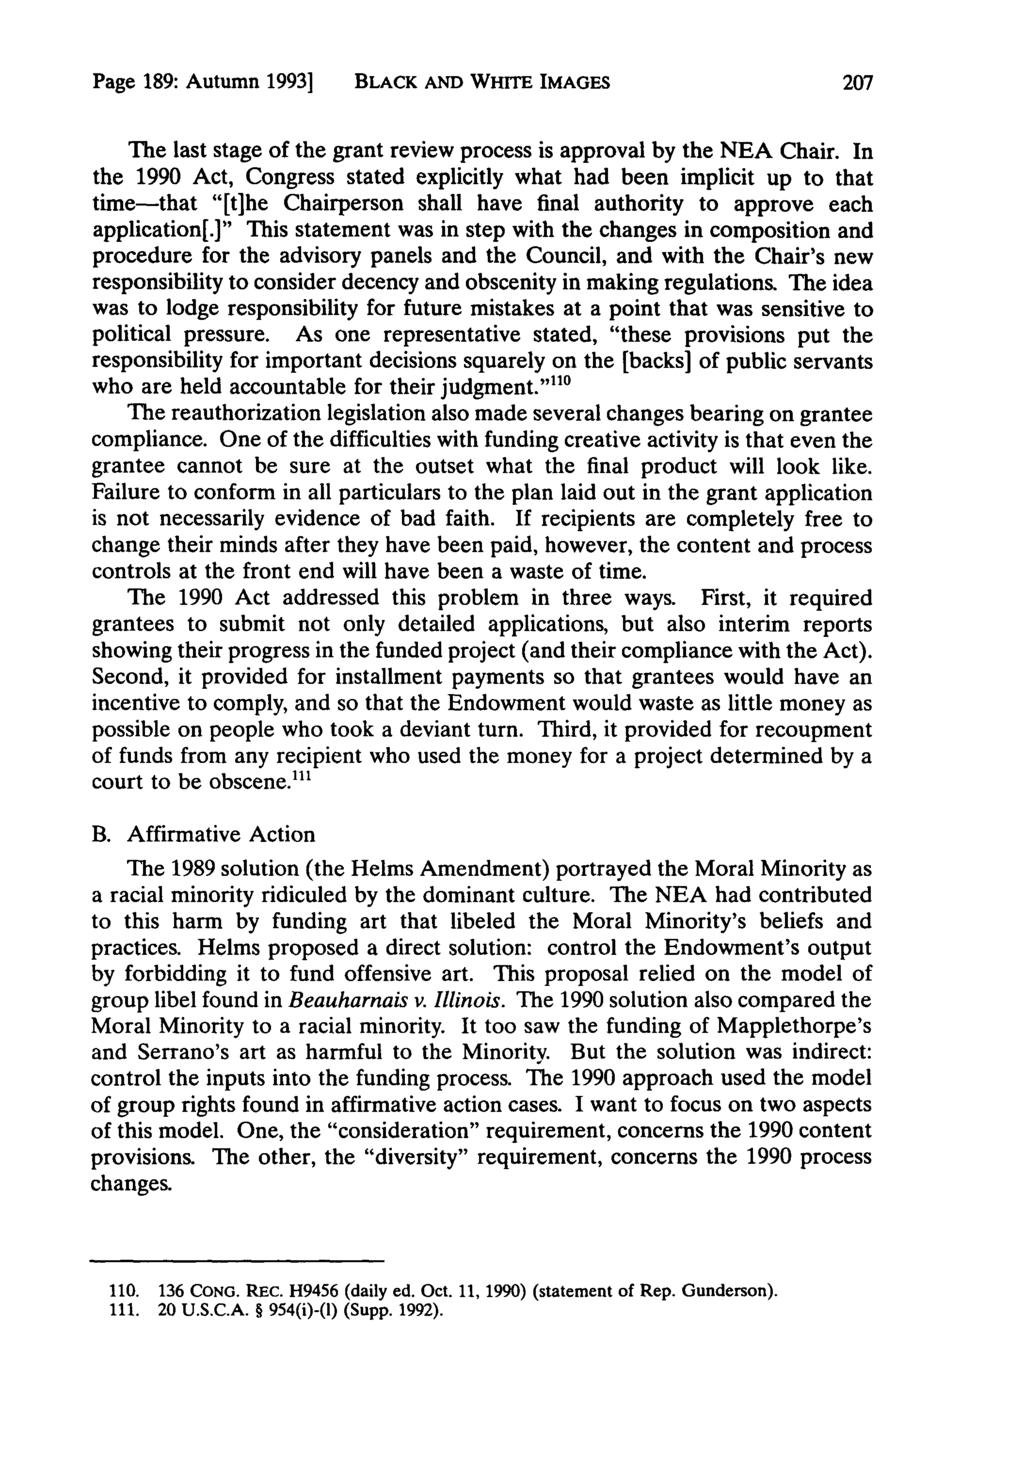 Page 189: Autumn 19931 BLACK AND WHITE IMAGES The last stage of the grant review process is approval by the NEA Chair.